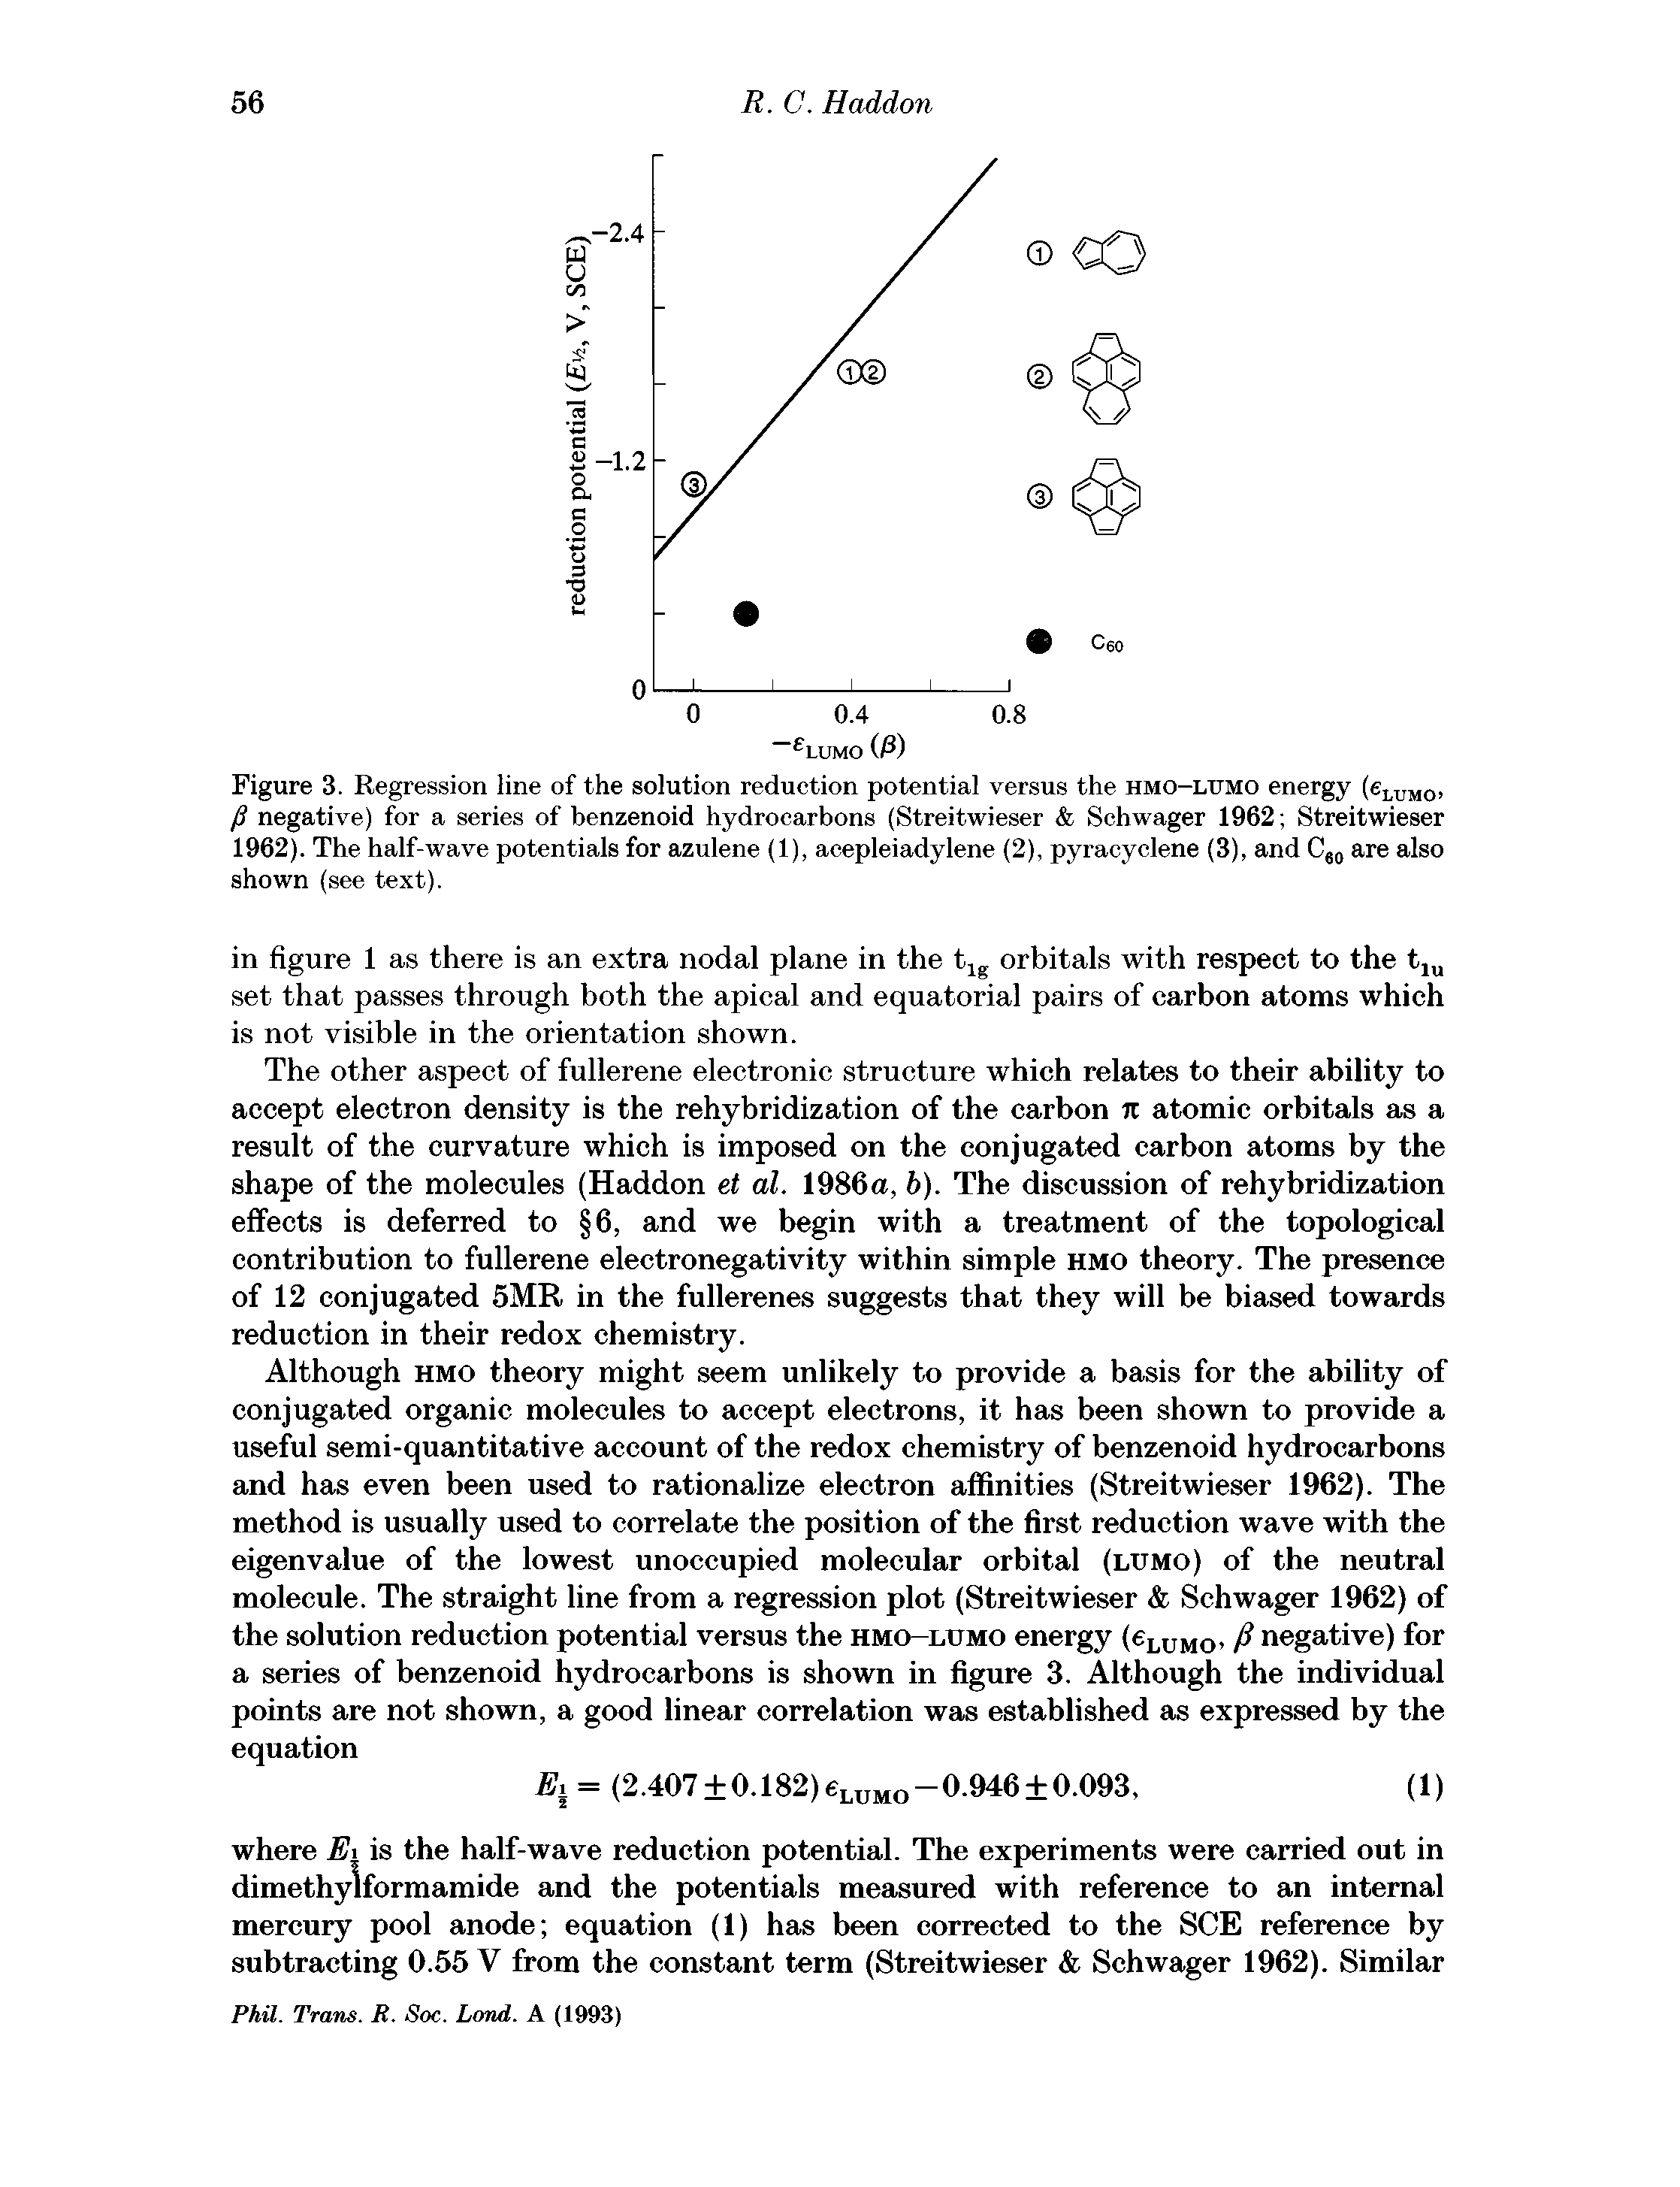 Figure 3. Regression line of the solution reduction potential versus the hmo-lumo energy (eLUM0, / negative) for a series of benzenoid hydrocarbons (Streitwieser Schwager 1962 Streitwieser 1962). The half-wave potentials for azulene (1), acepleiadylene (2), pyracyclene (3), and C60 are also shown (see text).